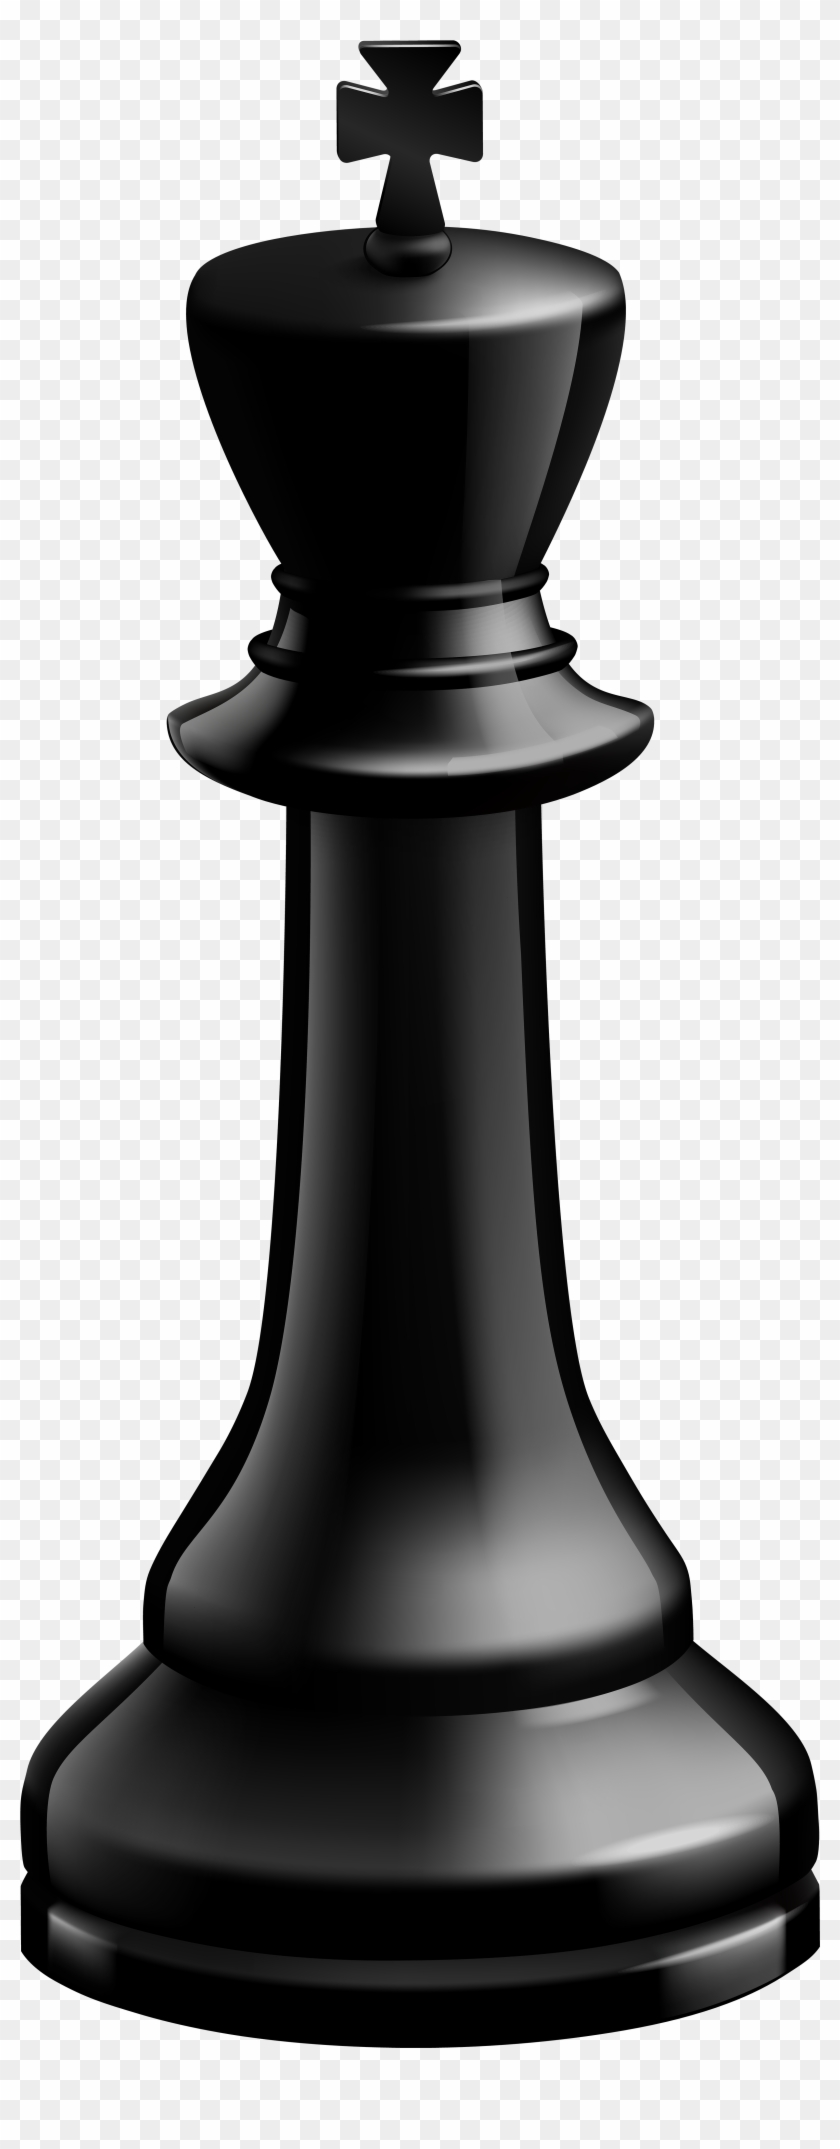 King Black Chess Piece Png Clip Art - Black King Chess Piece Png Transparent Png #443140